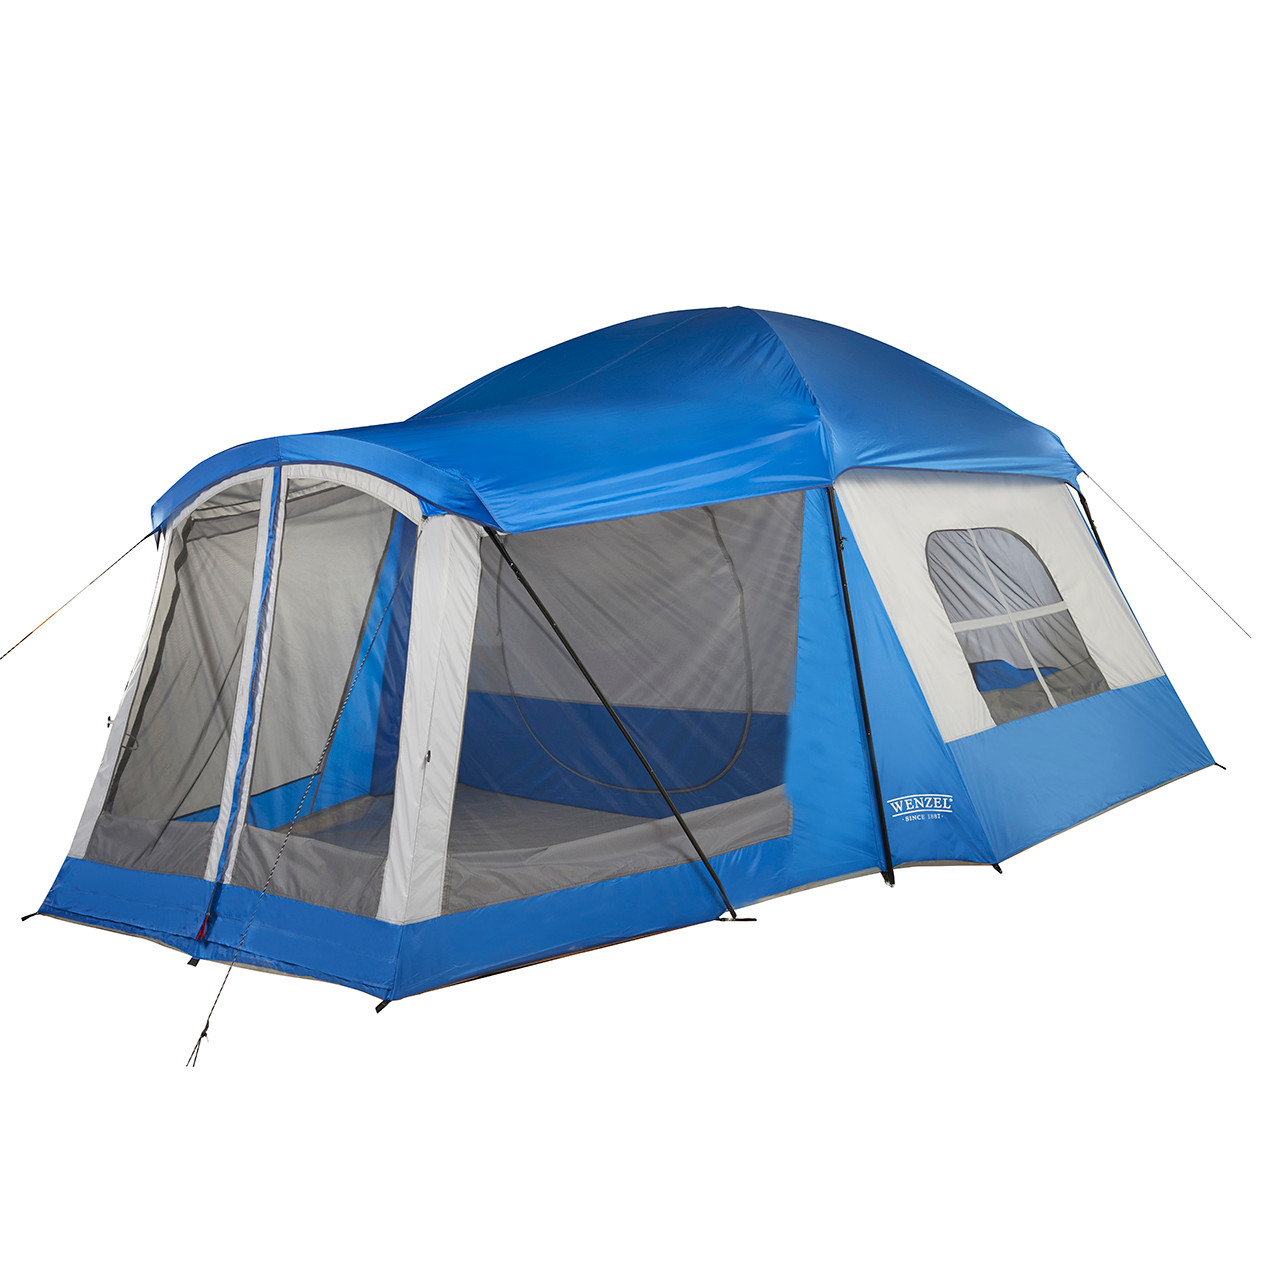 Wenzel Klondike 8 tent, blue and tan, setup with the rain fly on and the vestibule screen windows open and the main tent screen window open